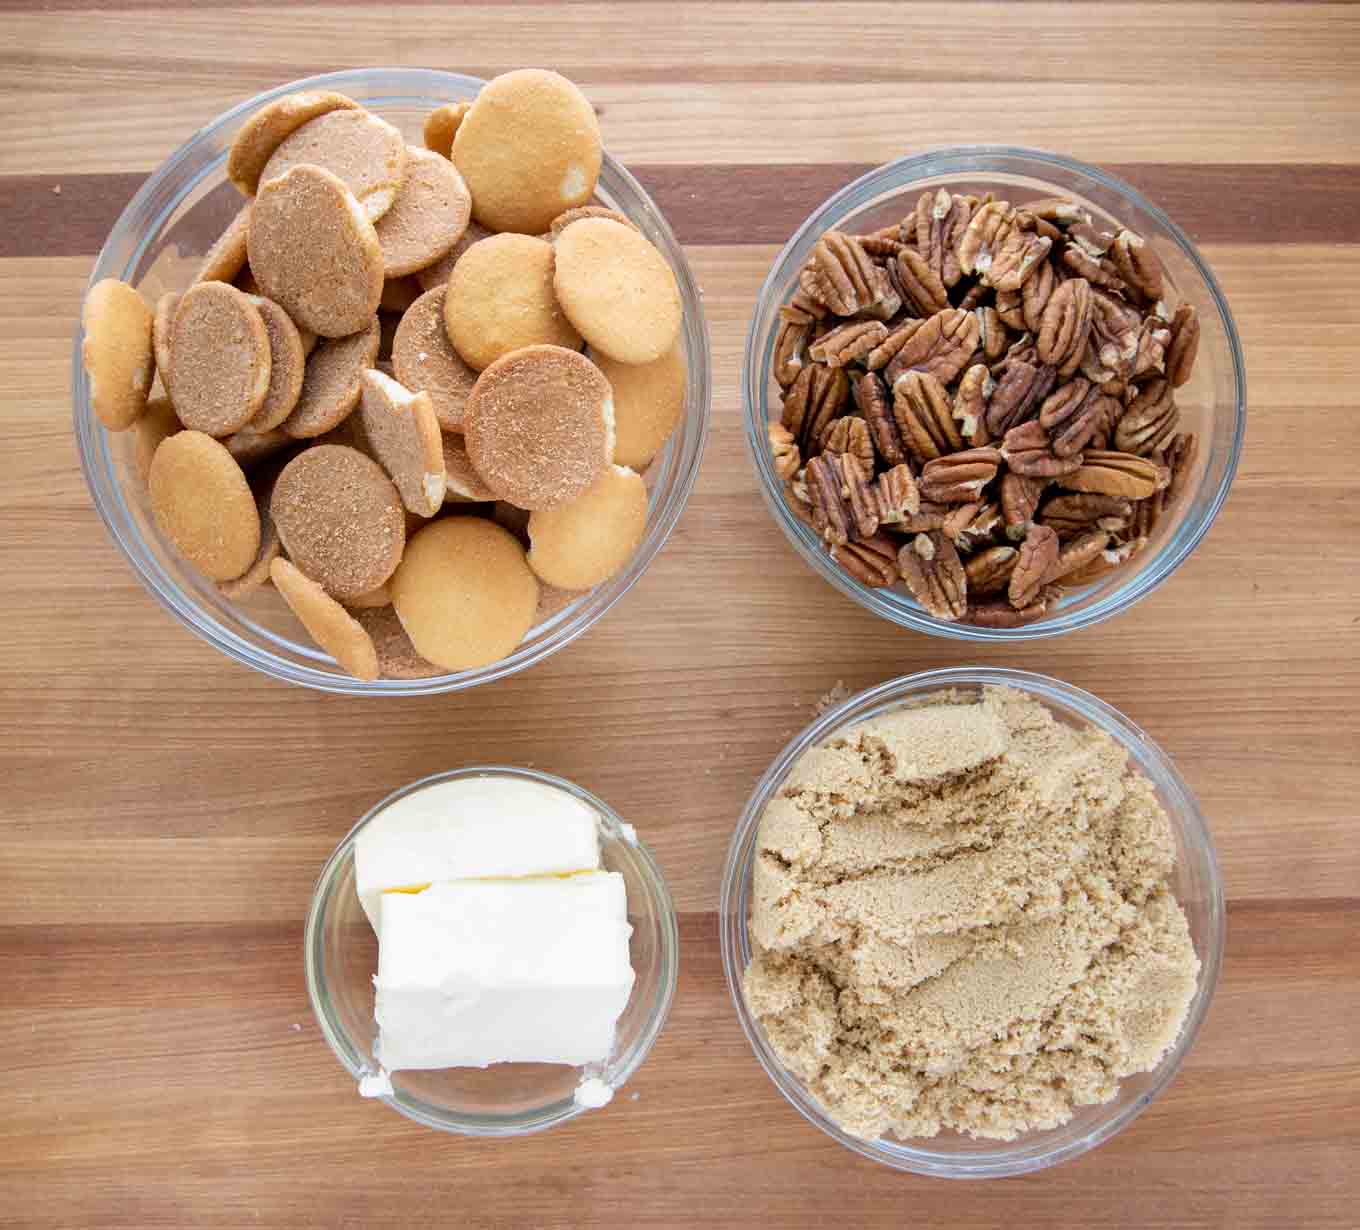 ingredients to make crunch layer in glass bowls